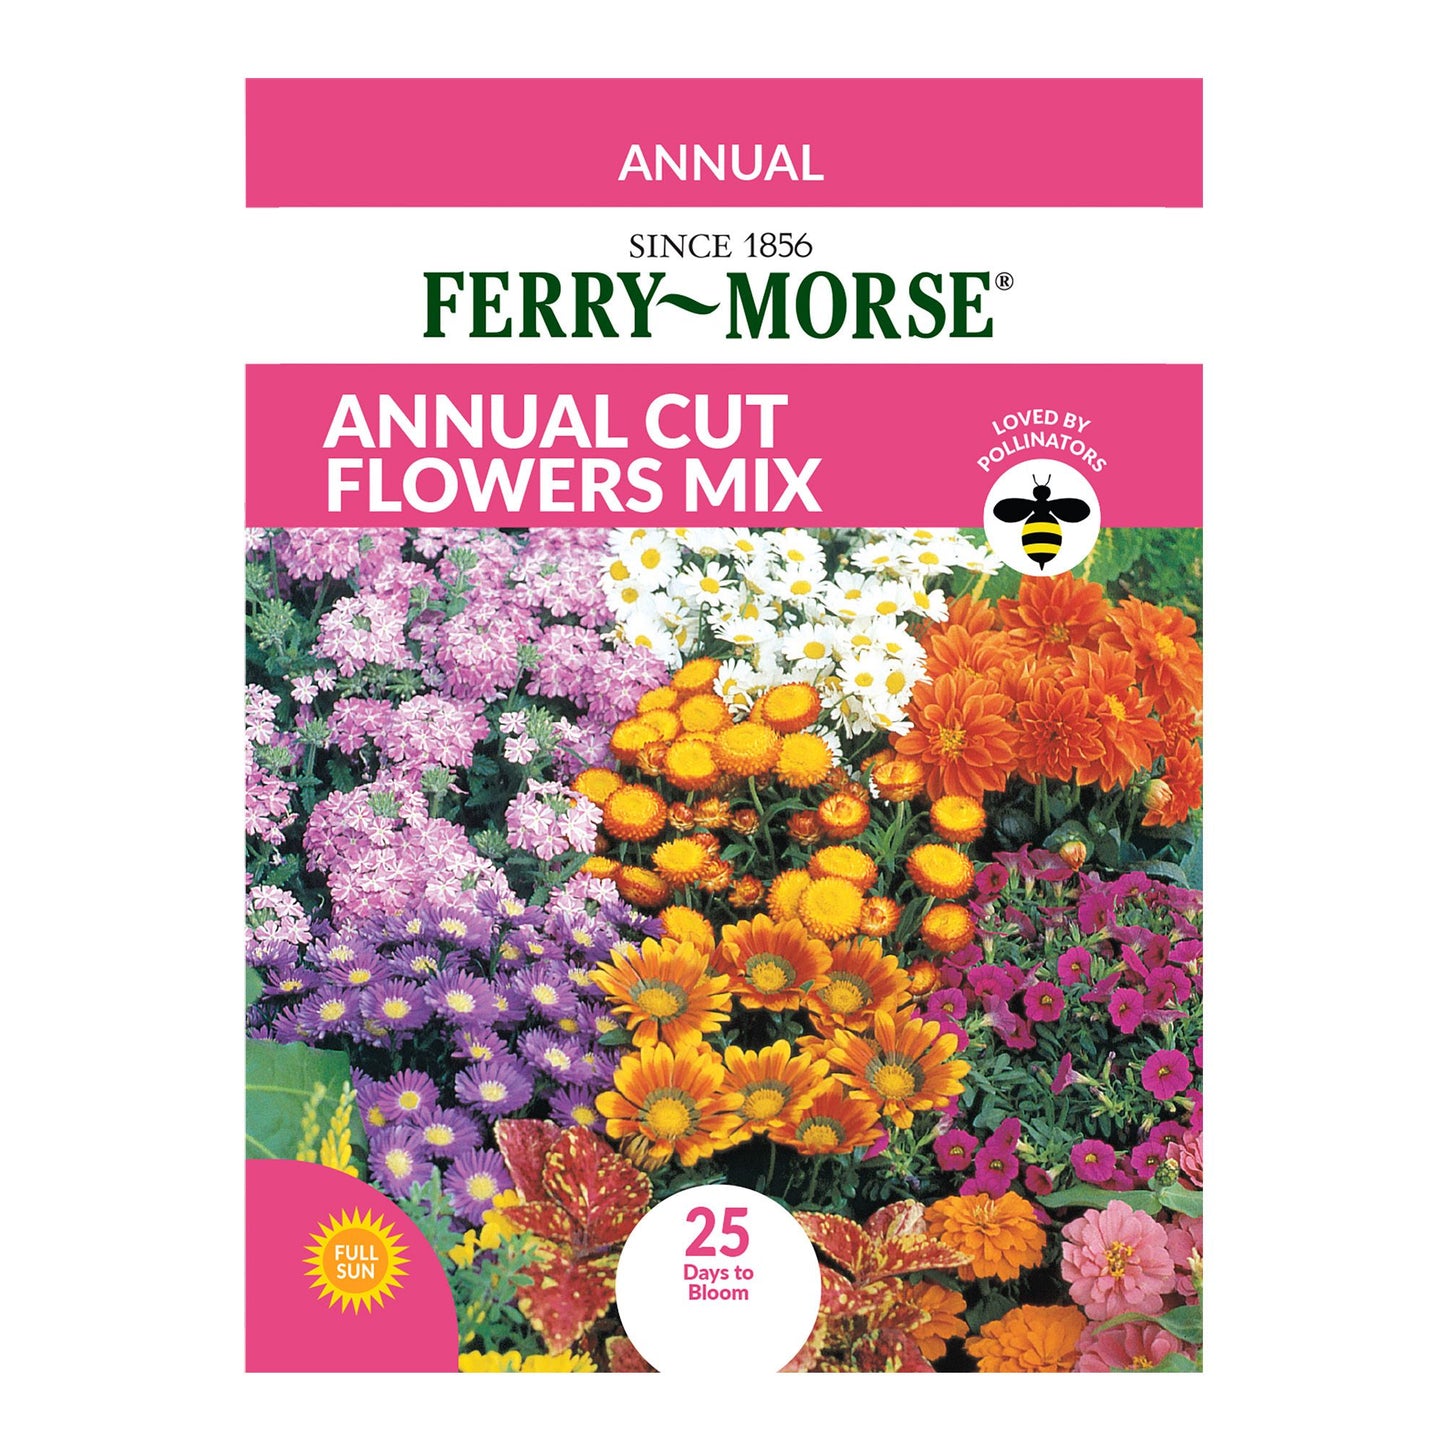 Annual Cut Flowers Mix Seeds